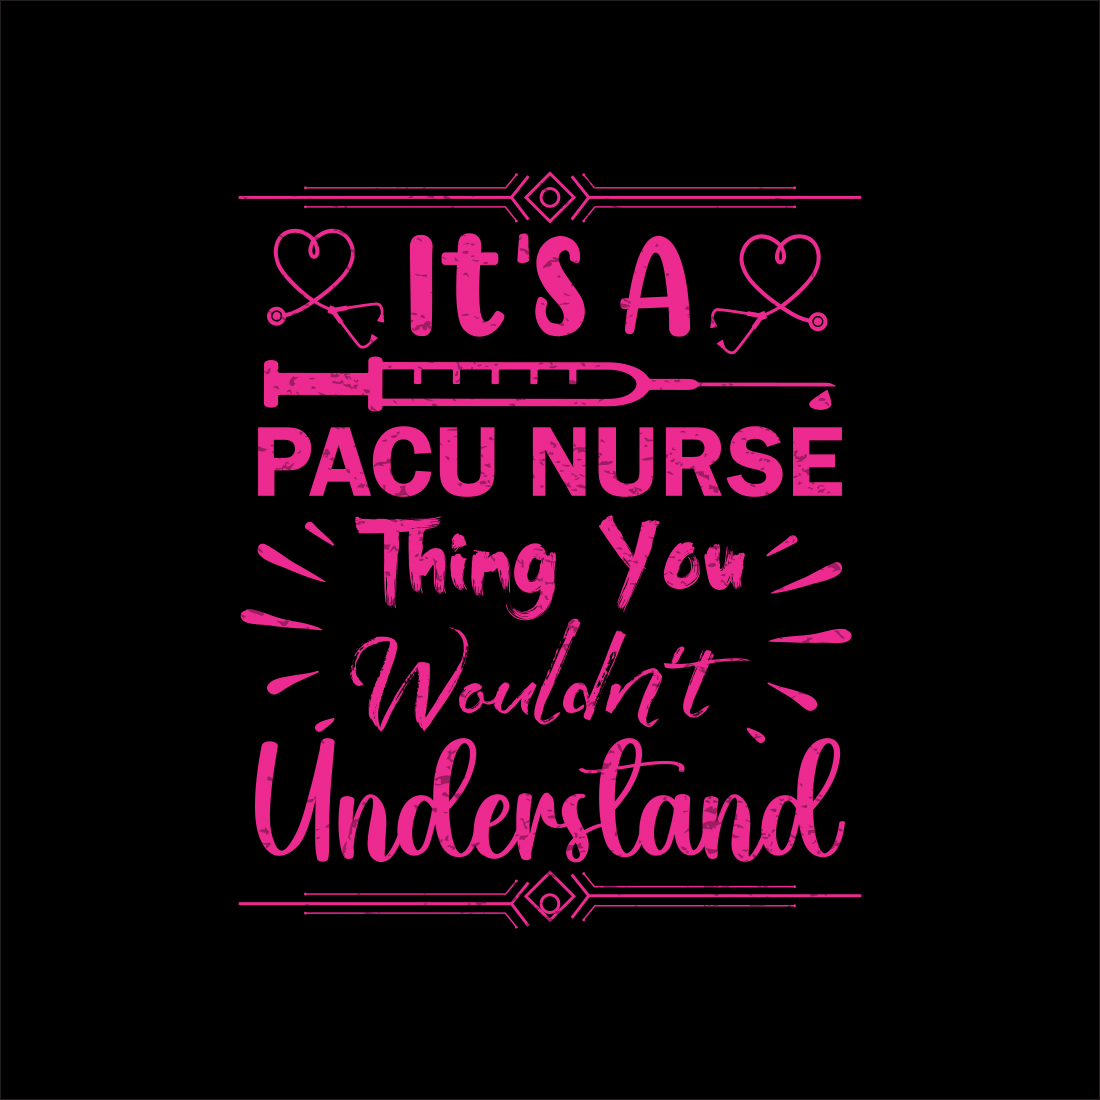 It's a pacu nurse thing you wouldn't understand.